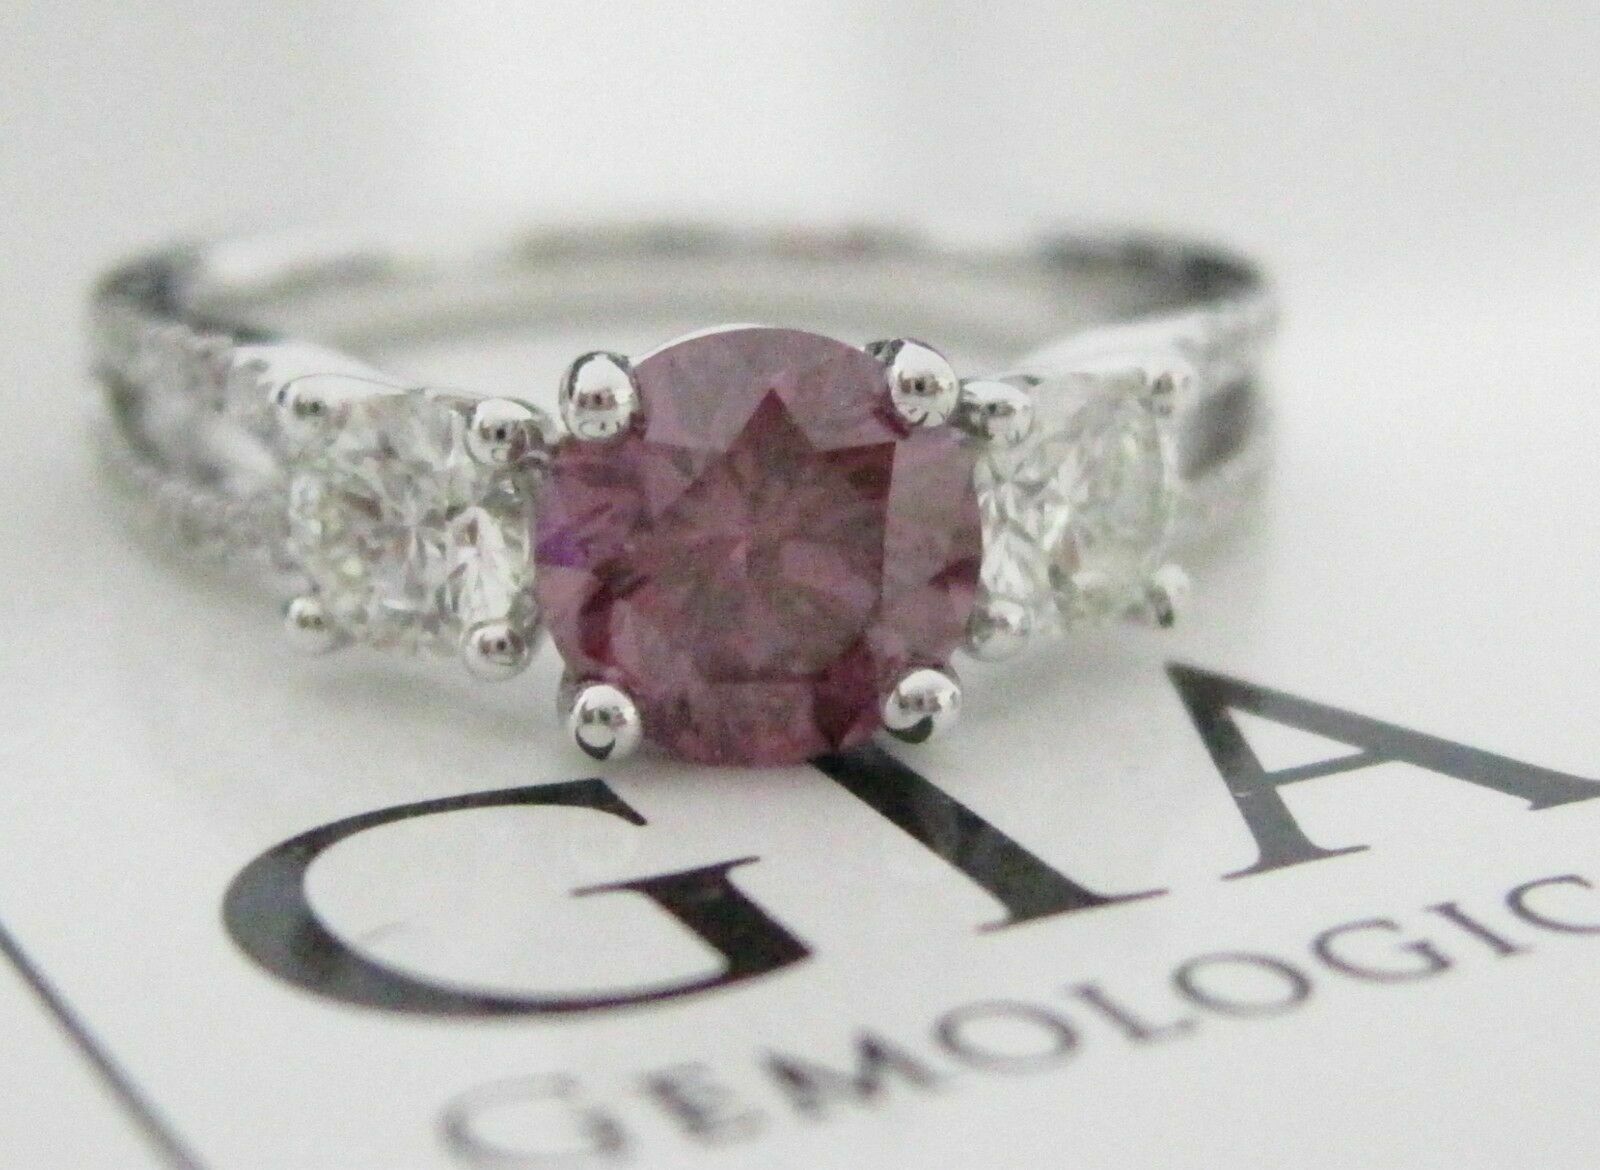 1.54 TCW GIA Round Fancy Color Purple Pink Diamond Solitaire Engagement Ring 18k